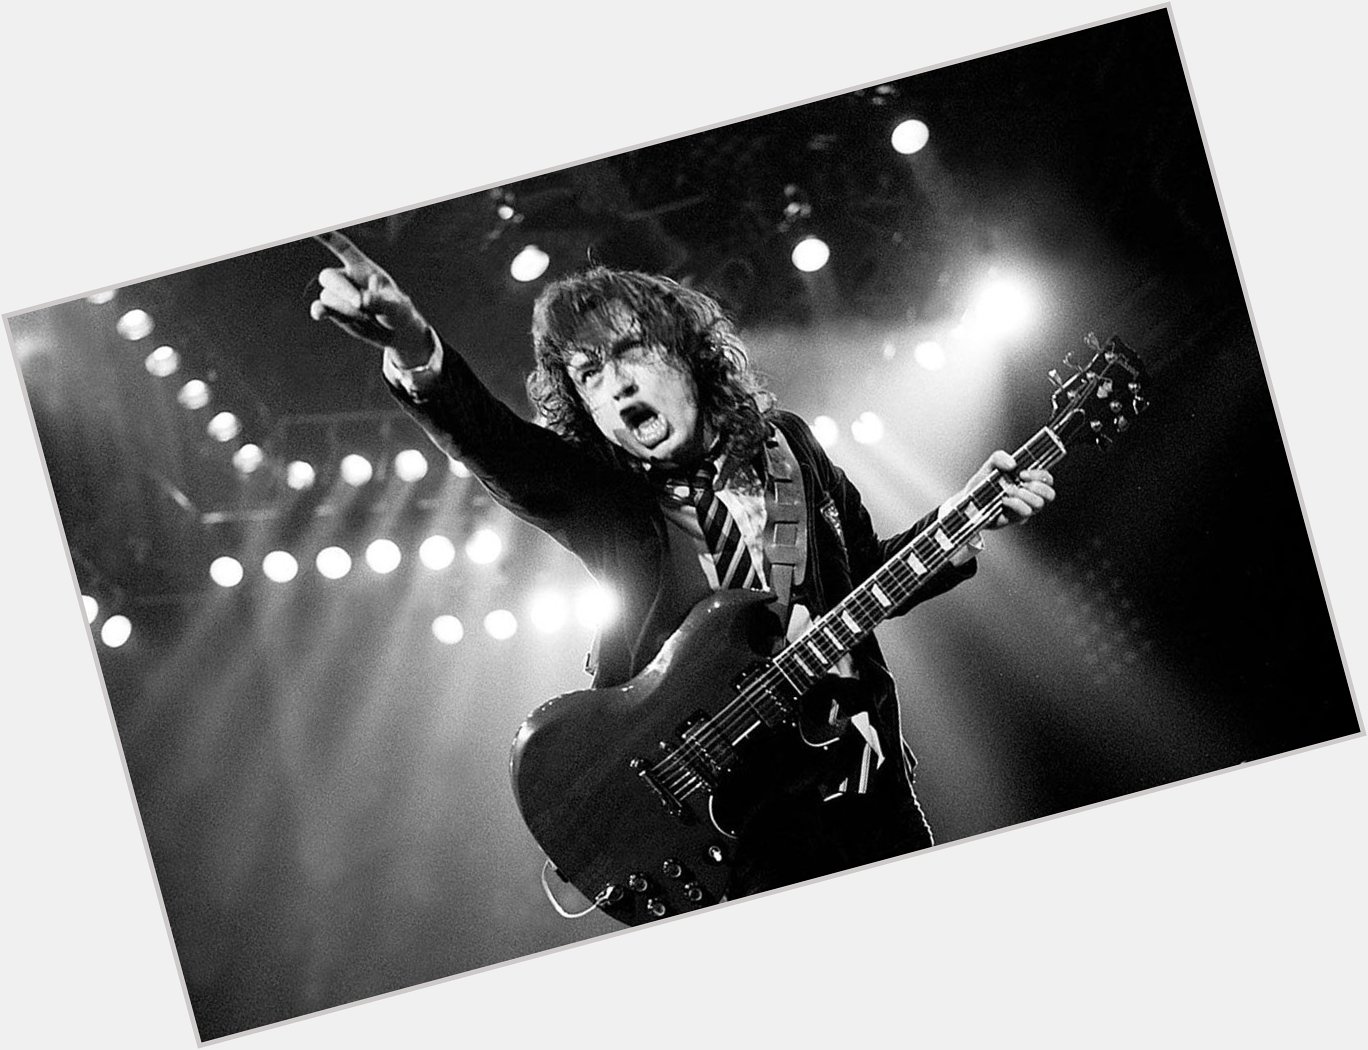 Happy birthday Angus Young
Born March 31, 1955. 